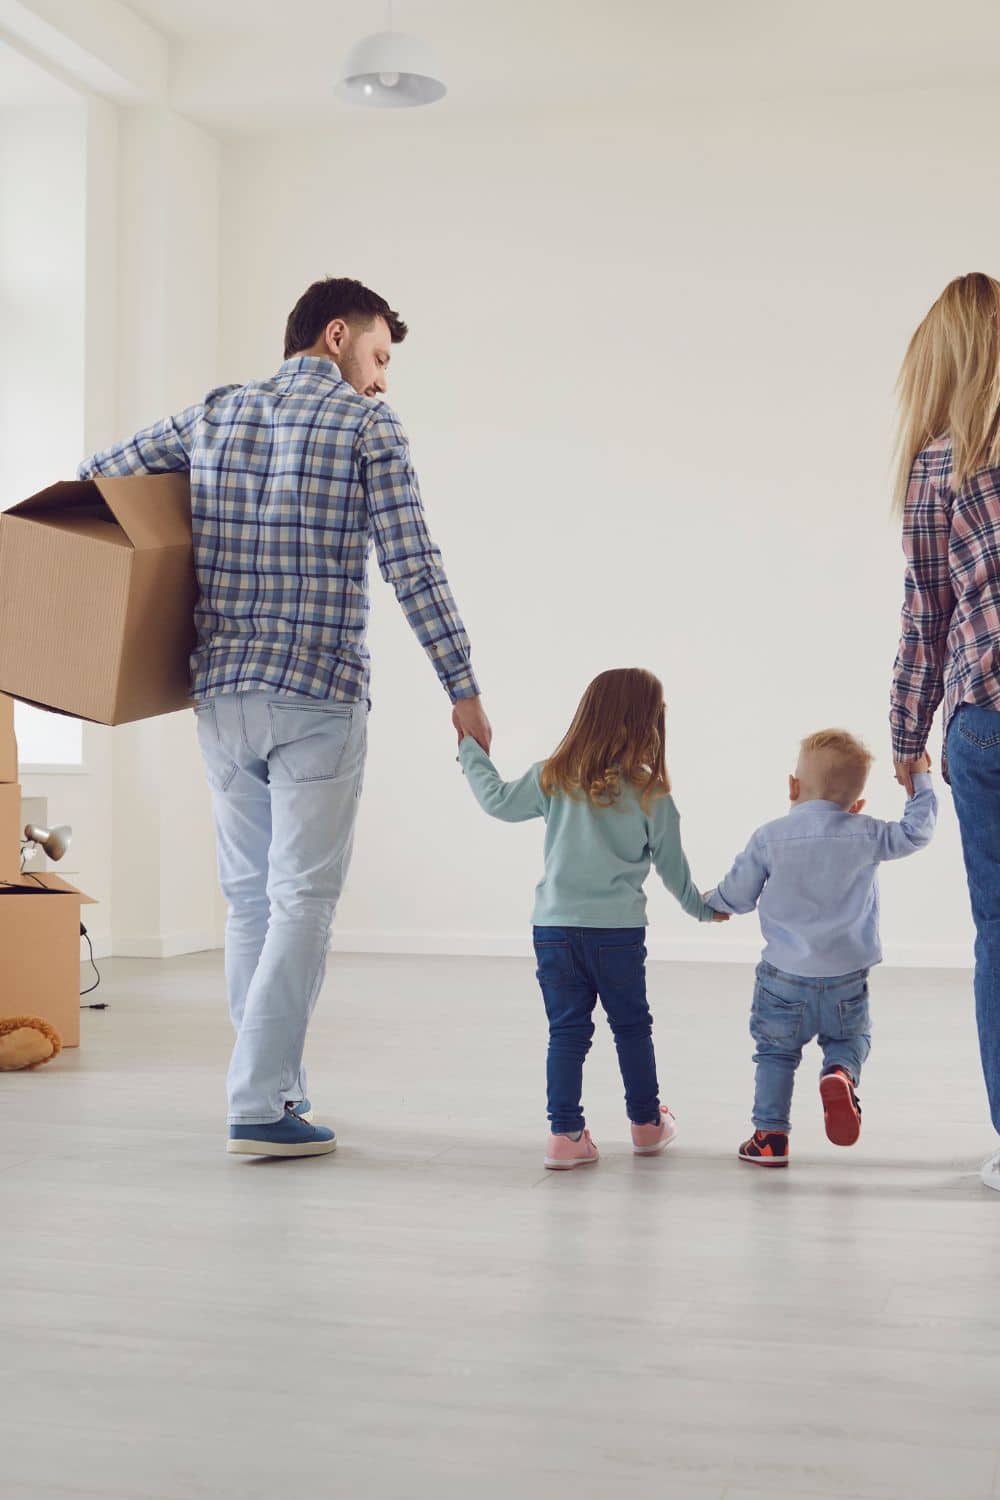 What Makes A Good Moving Company?